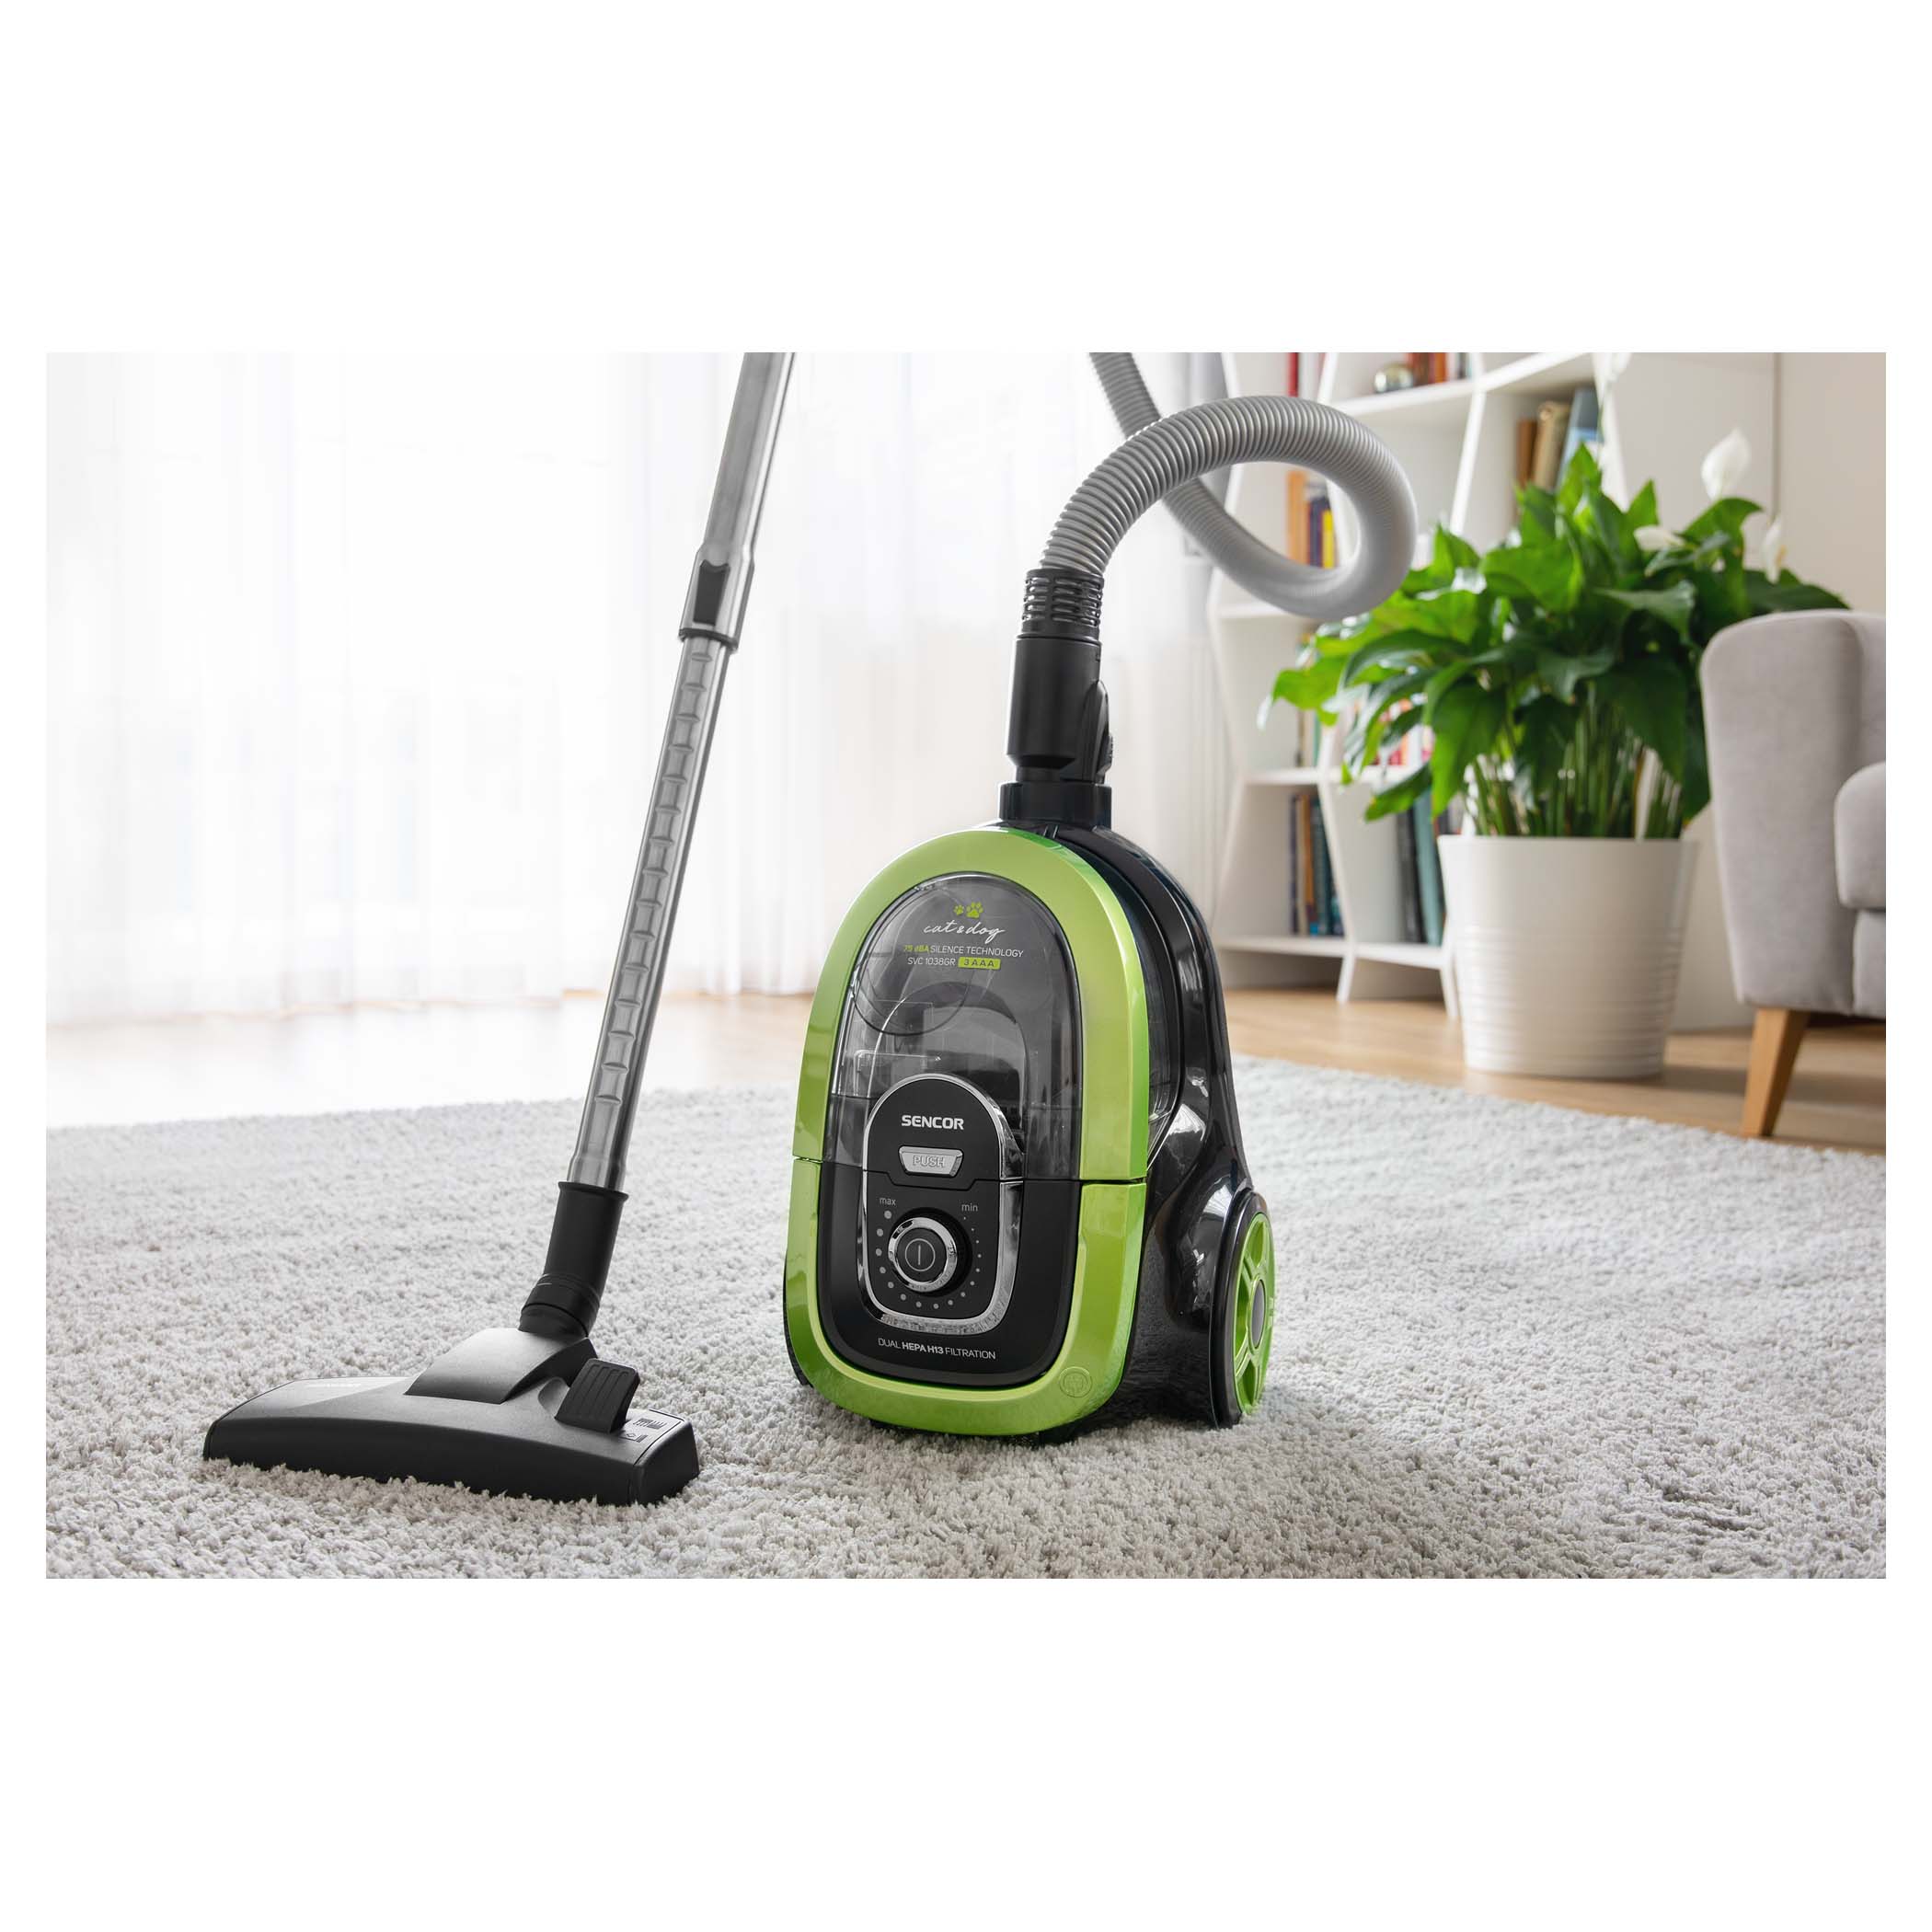 Bagged vs bagless vacuum: what's best for you? | TechRadar